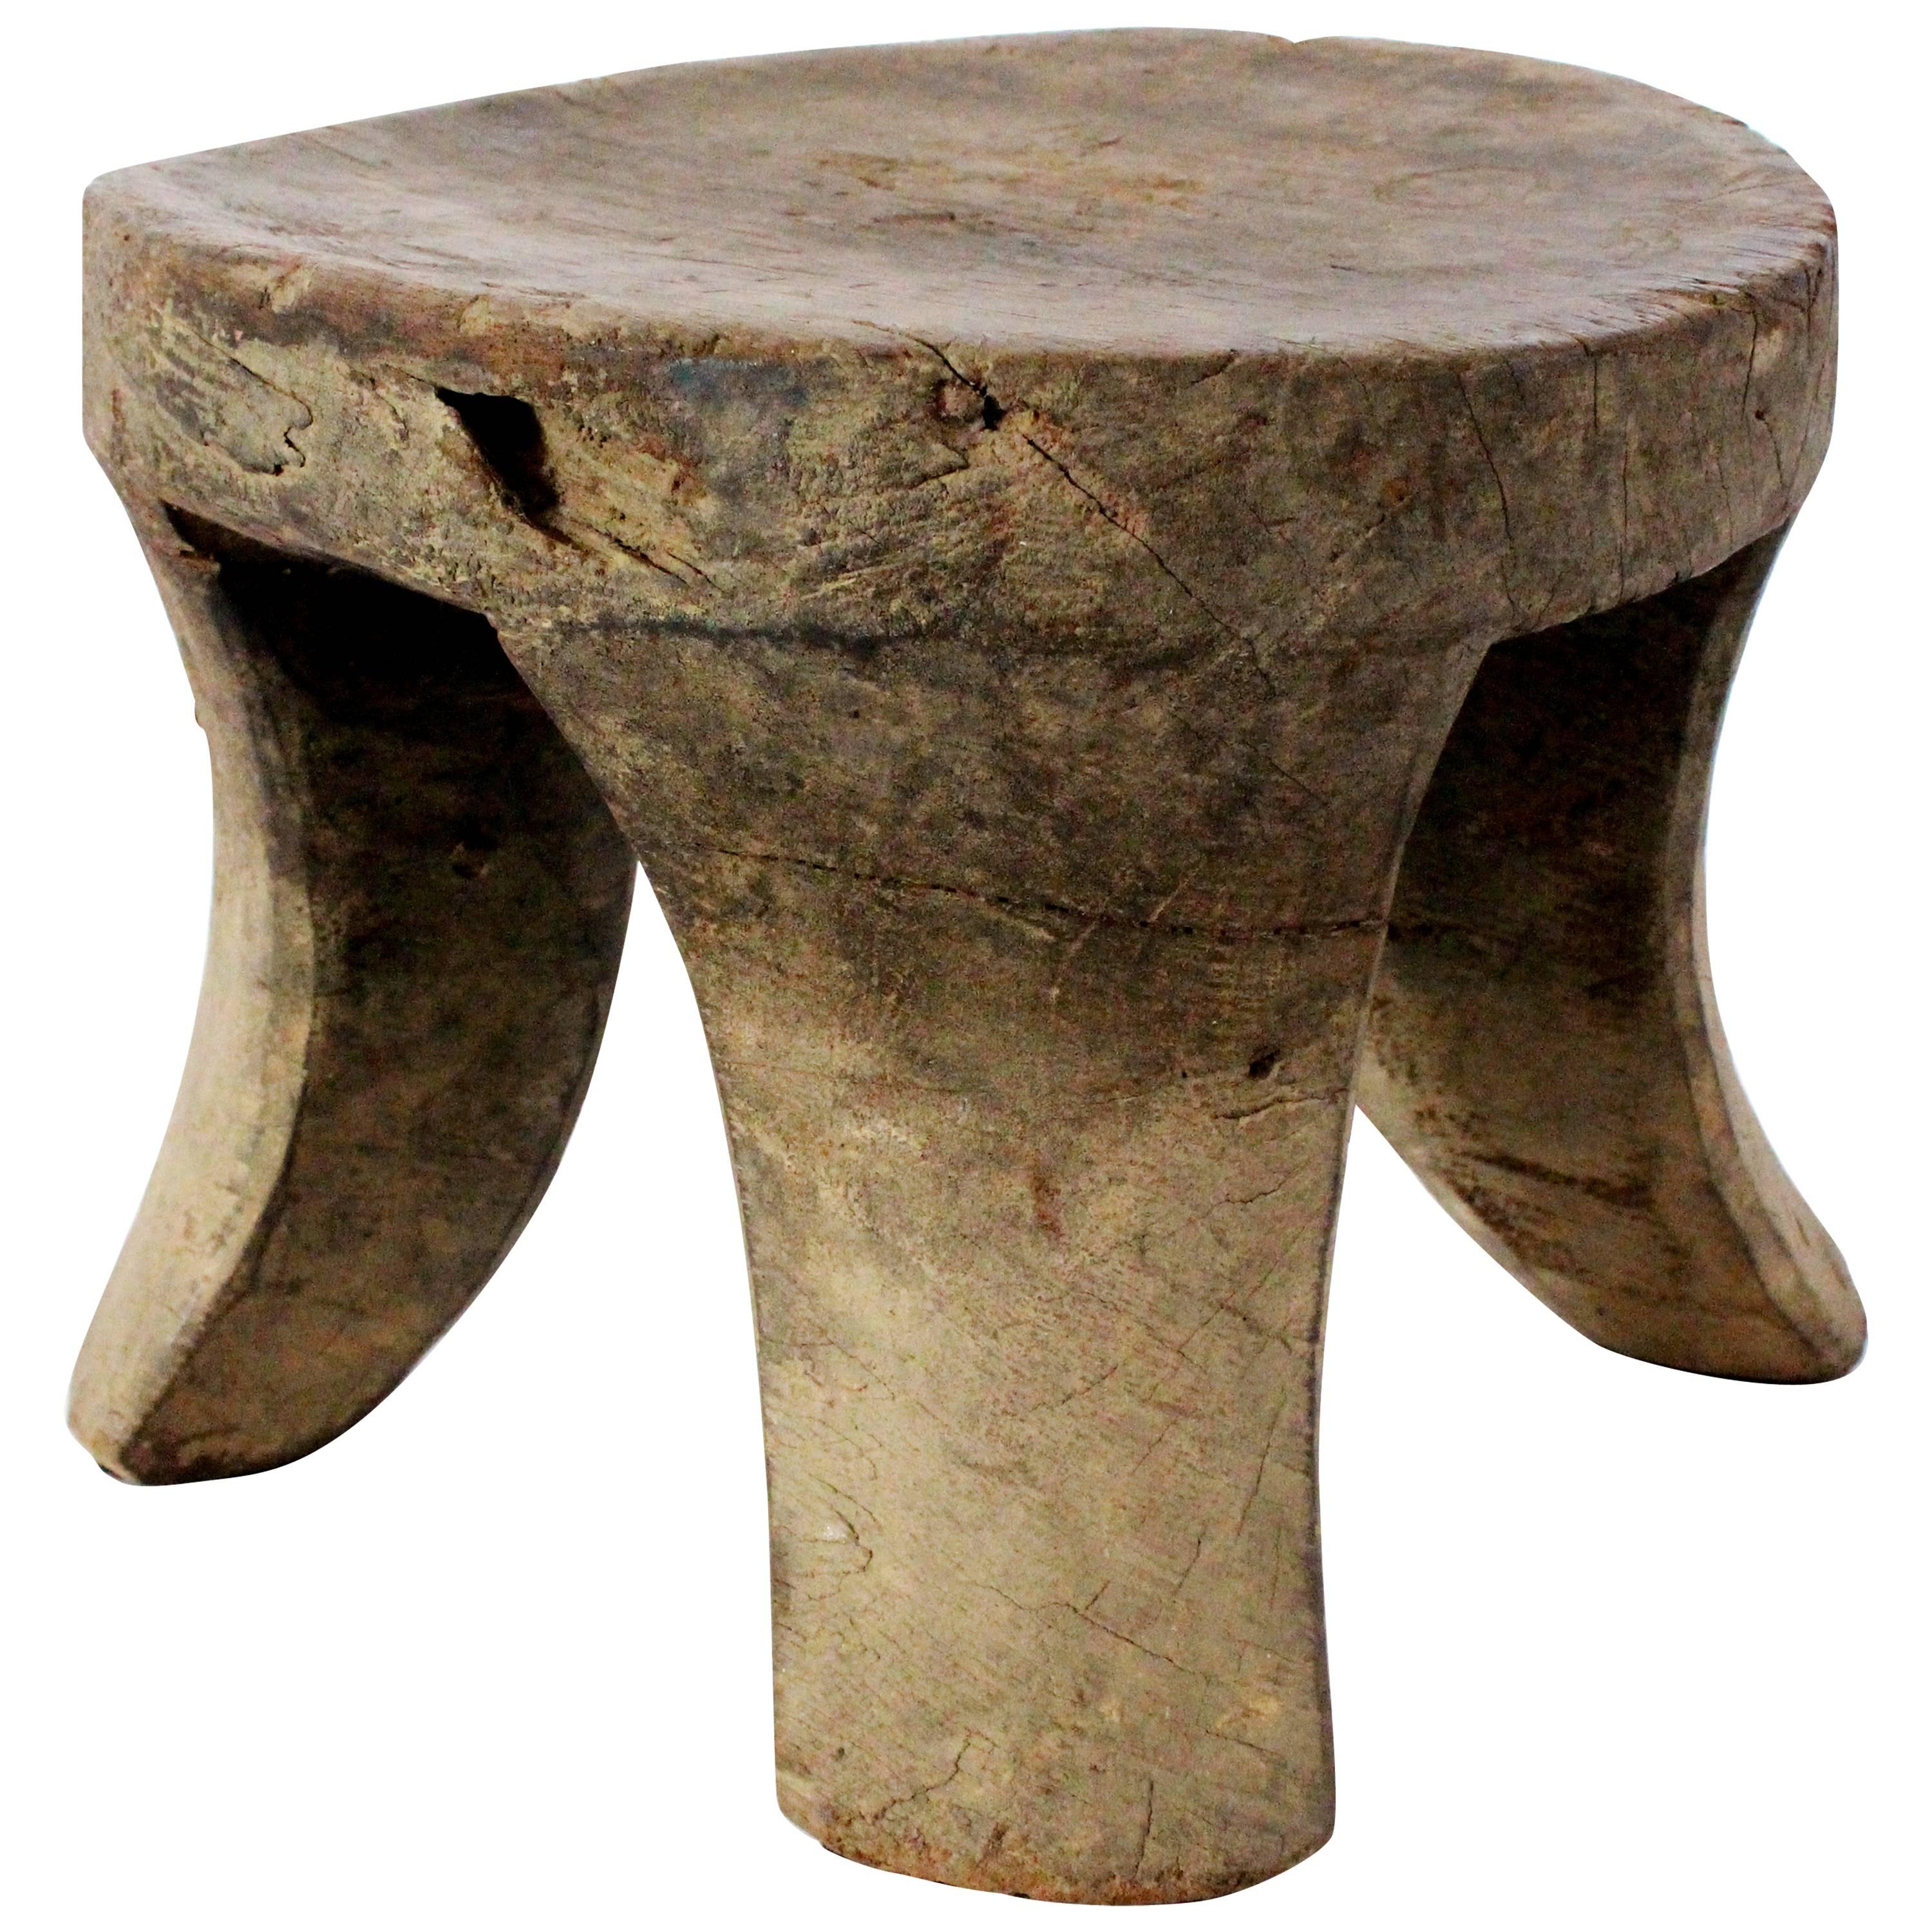 Stool with Curved Legs